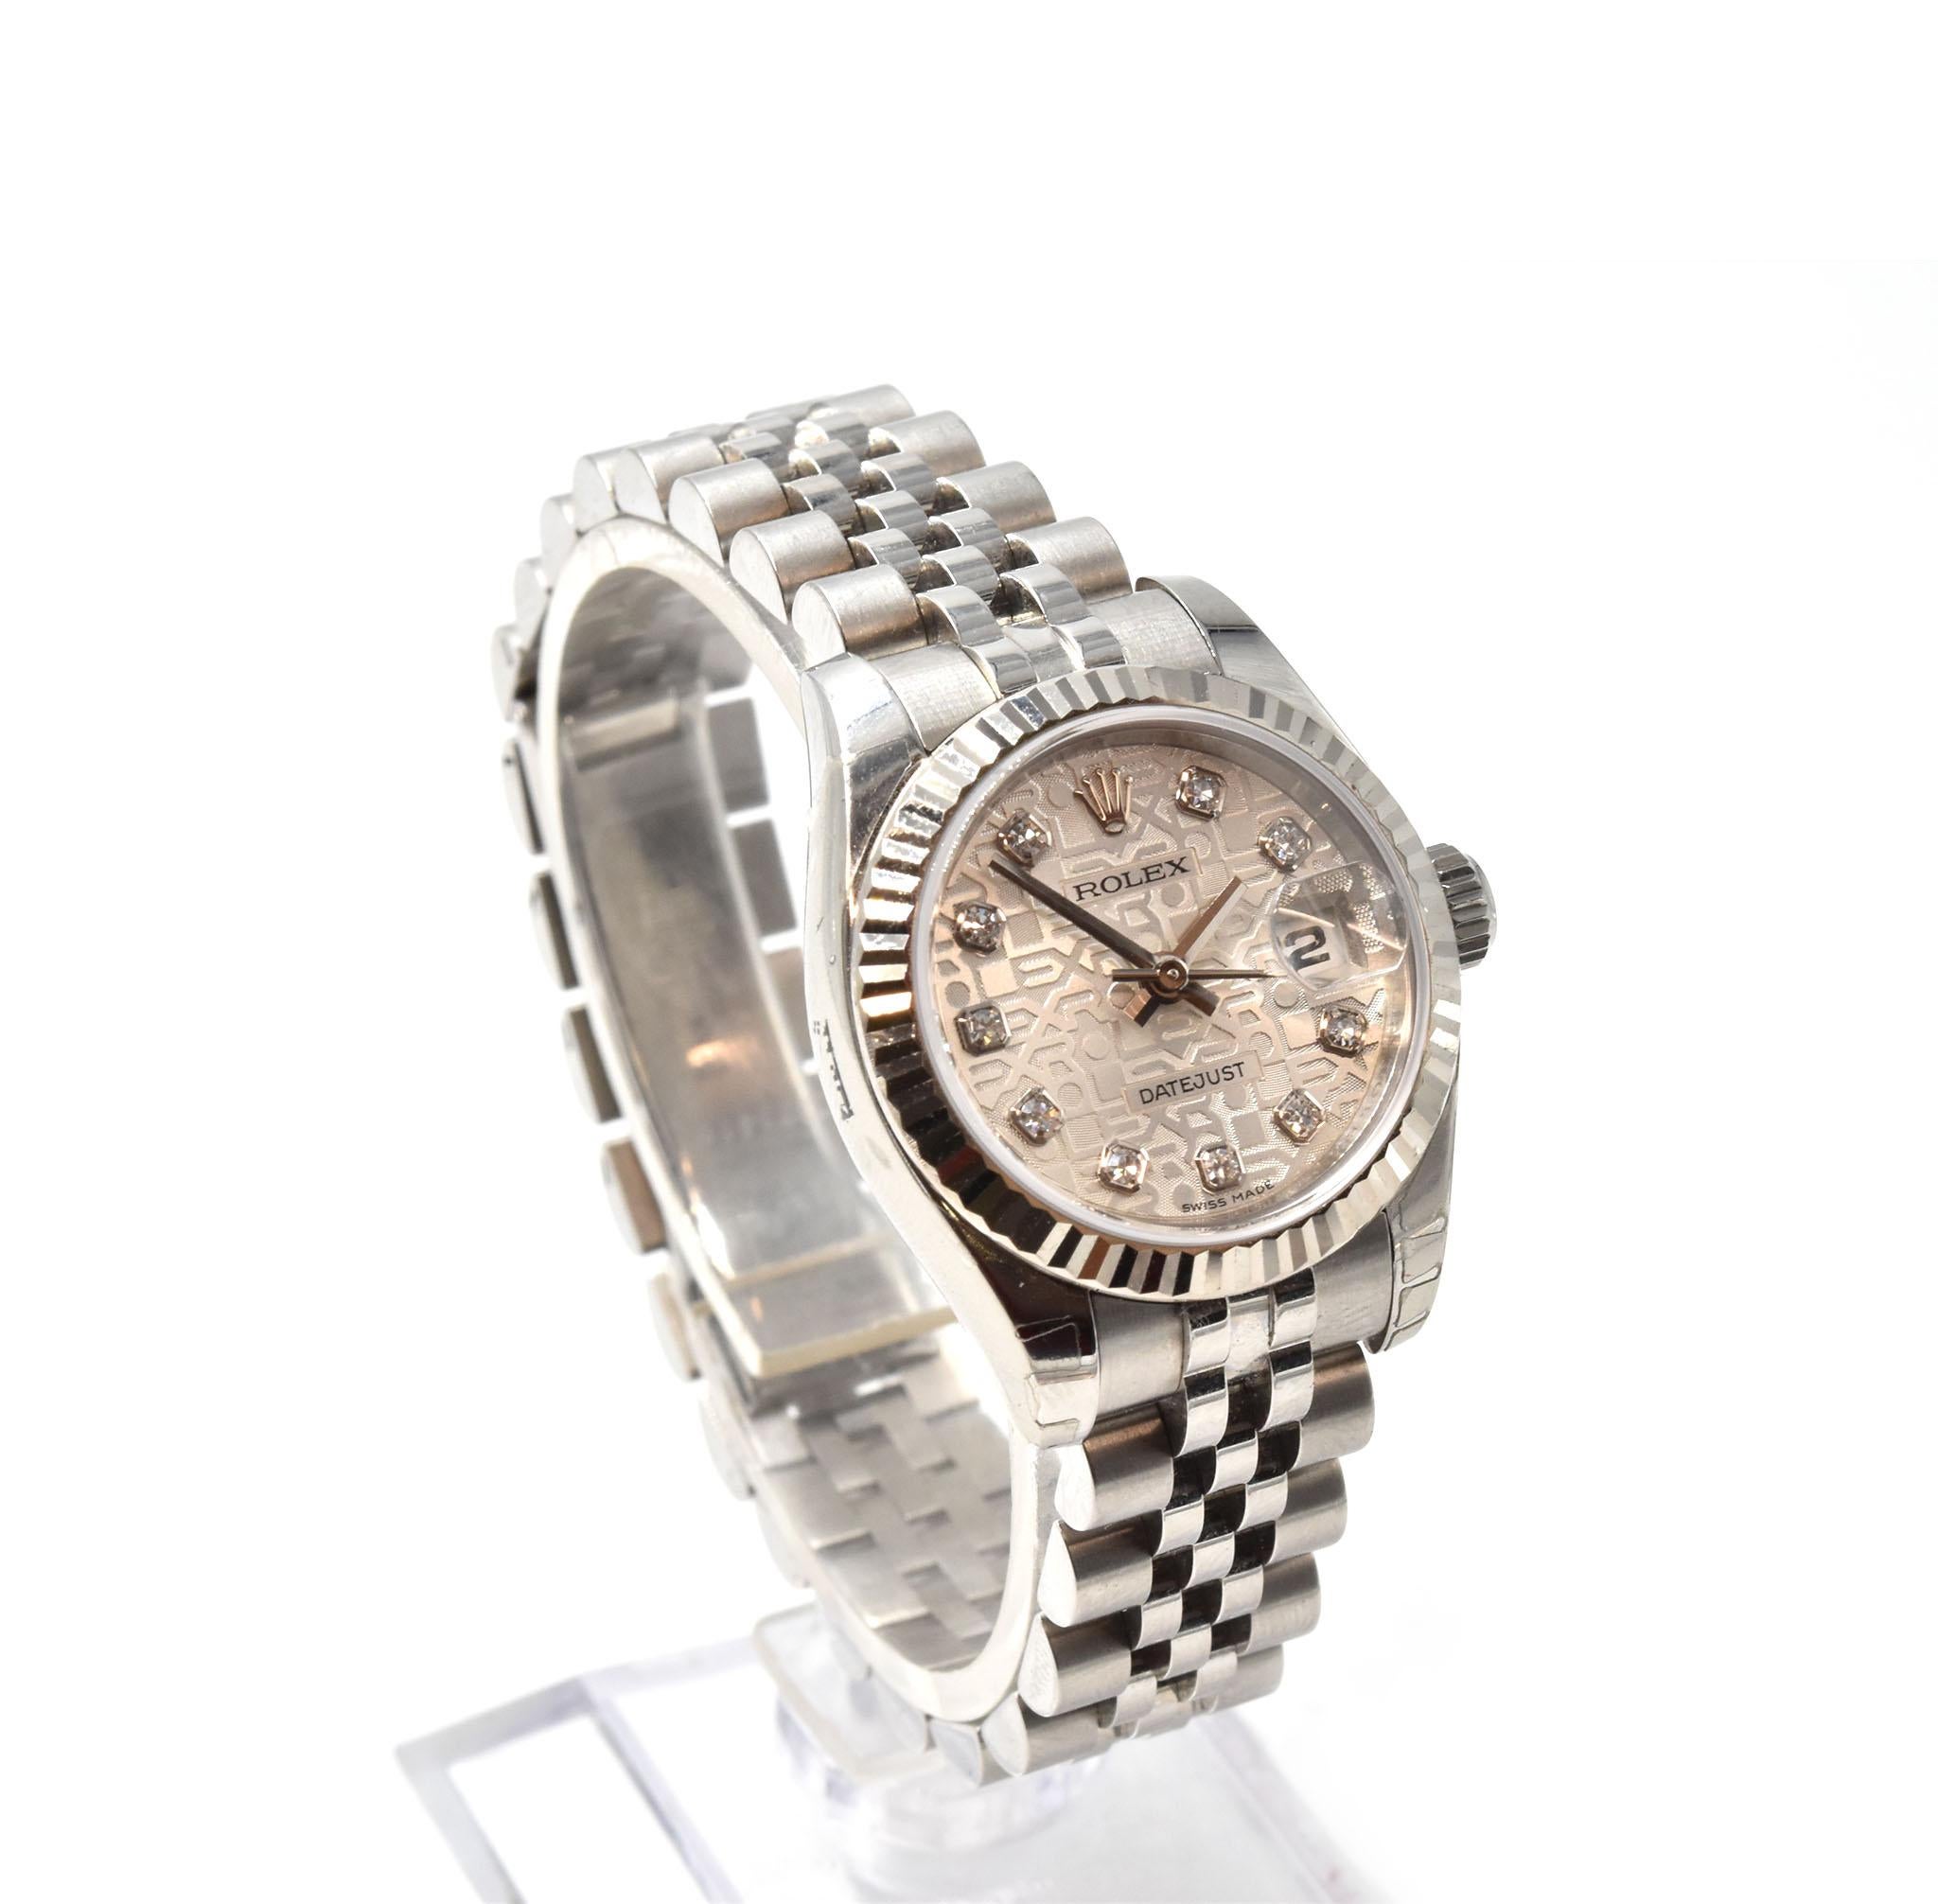 Movement: automatic Rolex caliber 2235 movement
Function: hours, minutes, seconds, date
Case: round 26mm stainless steel case with 18k white gold fluted bezel, sapphire protective crystal, screw-down crown, water resistant to 100 meters
Band: